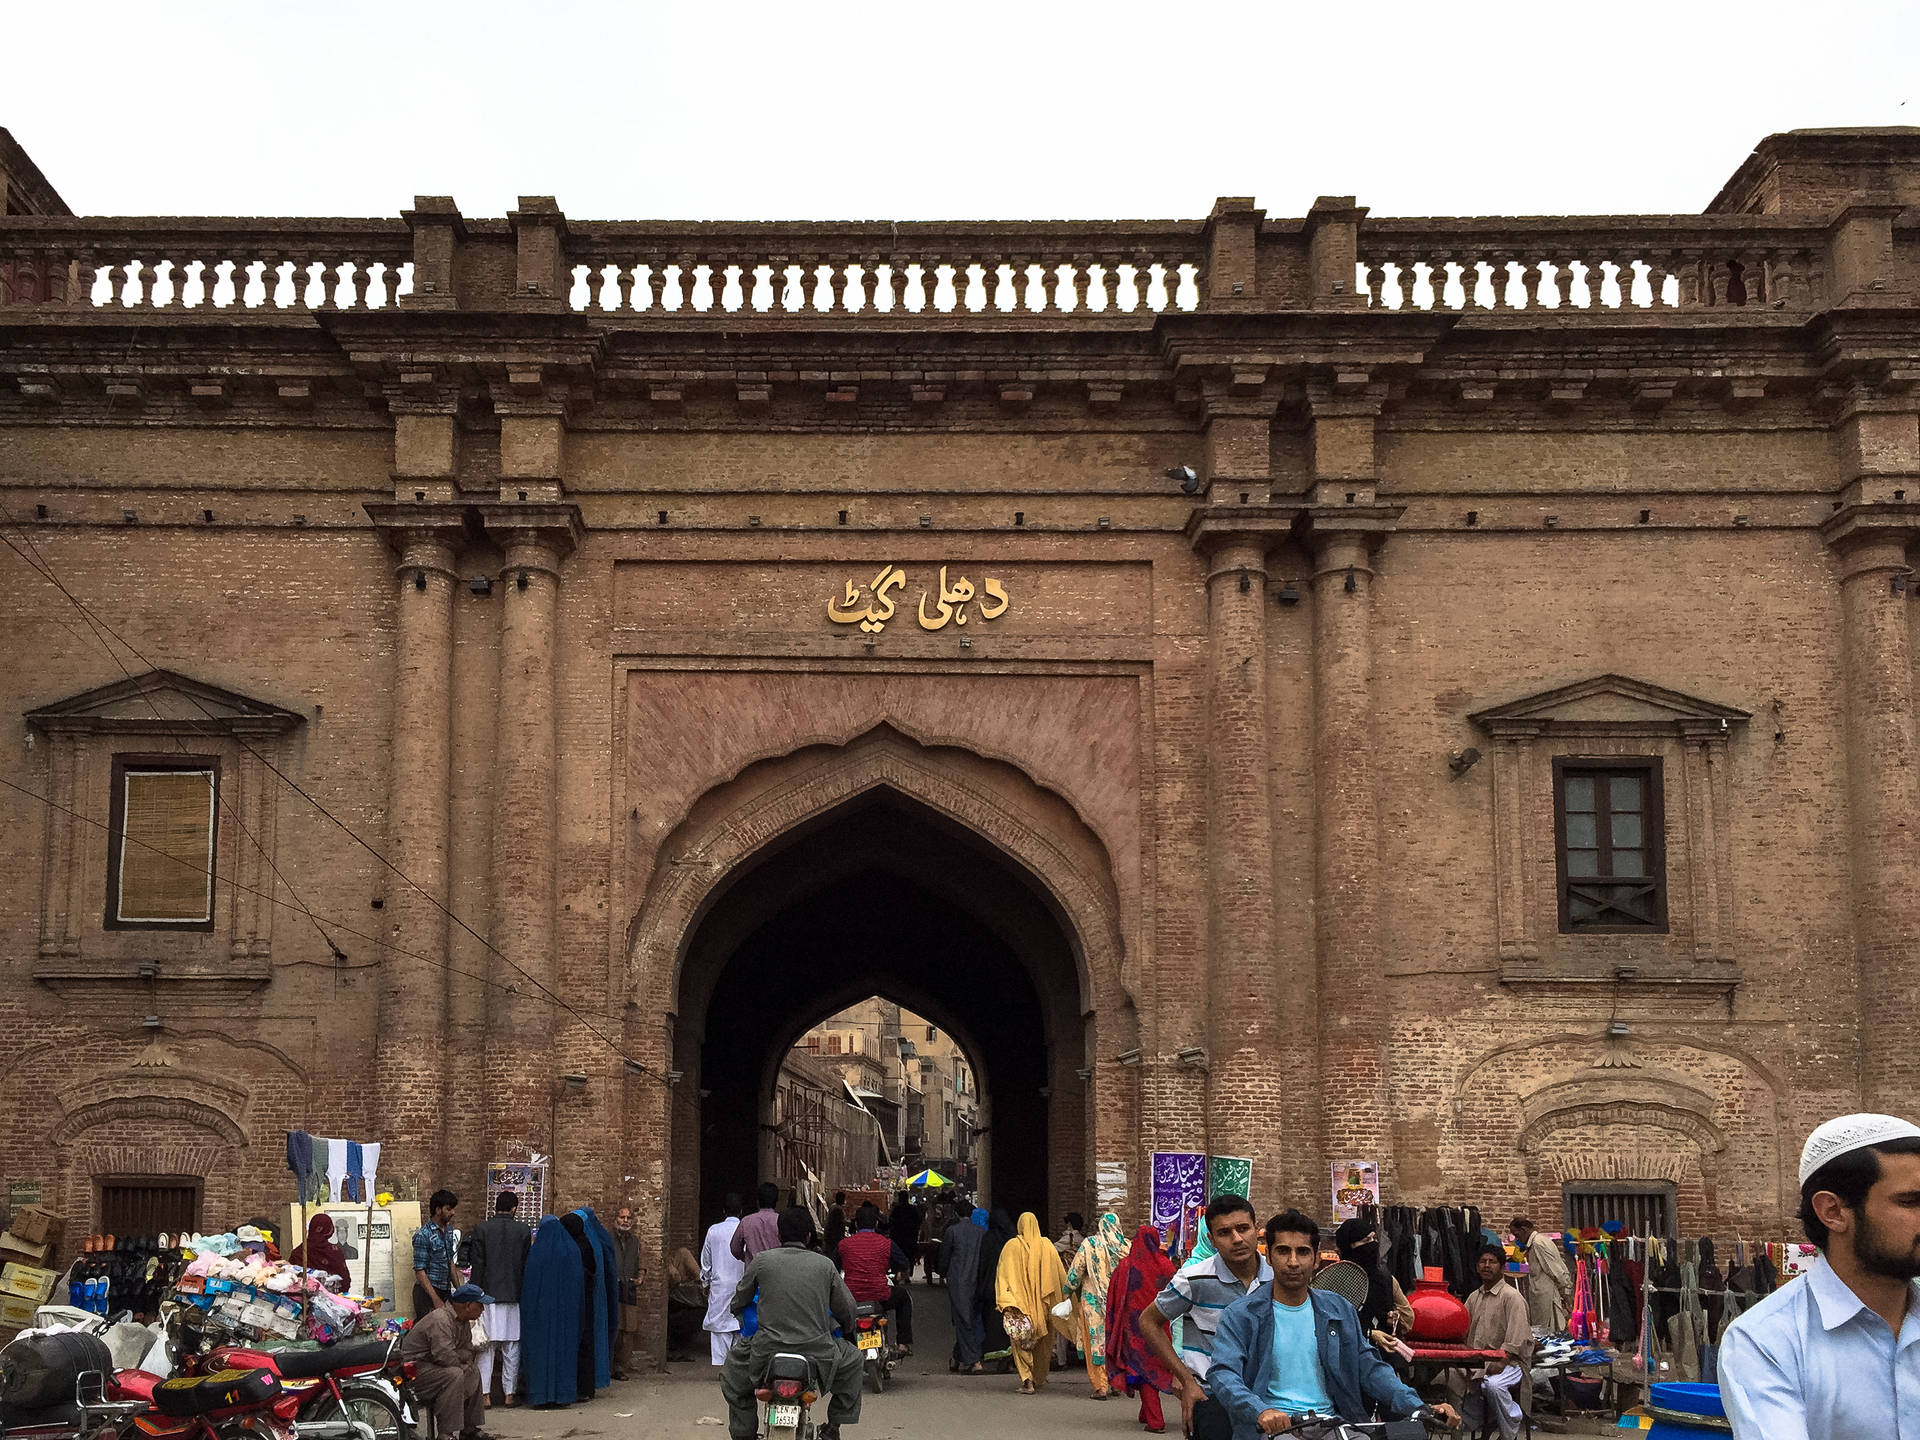 Lahoredelhi Gate Translates To Lahore Delhiporten In Swedish. However, This Phrase Doesn't Relate To Computer Or Mobile Wallpaper, So It Would Be Best To Provide More Context To Determine An Appropriate Translation. Wallpaper